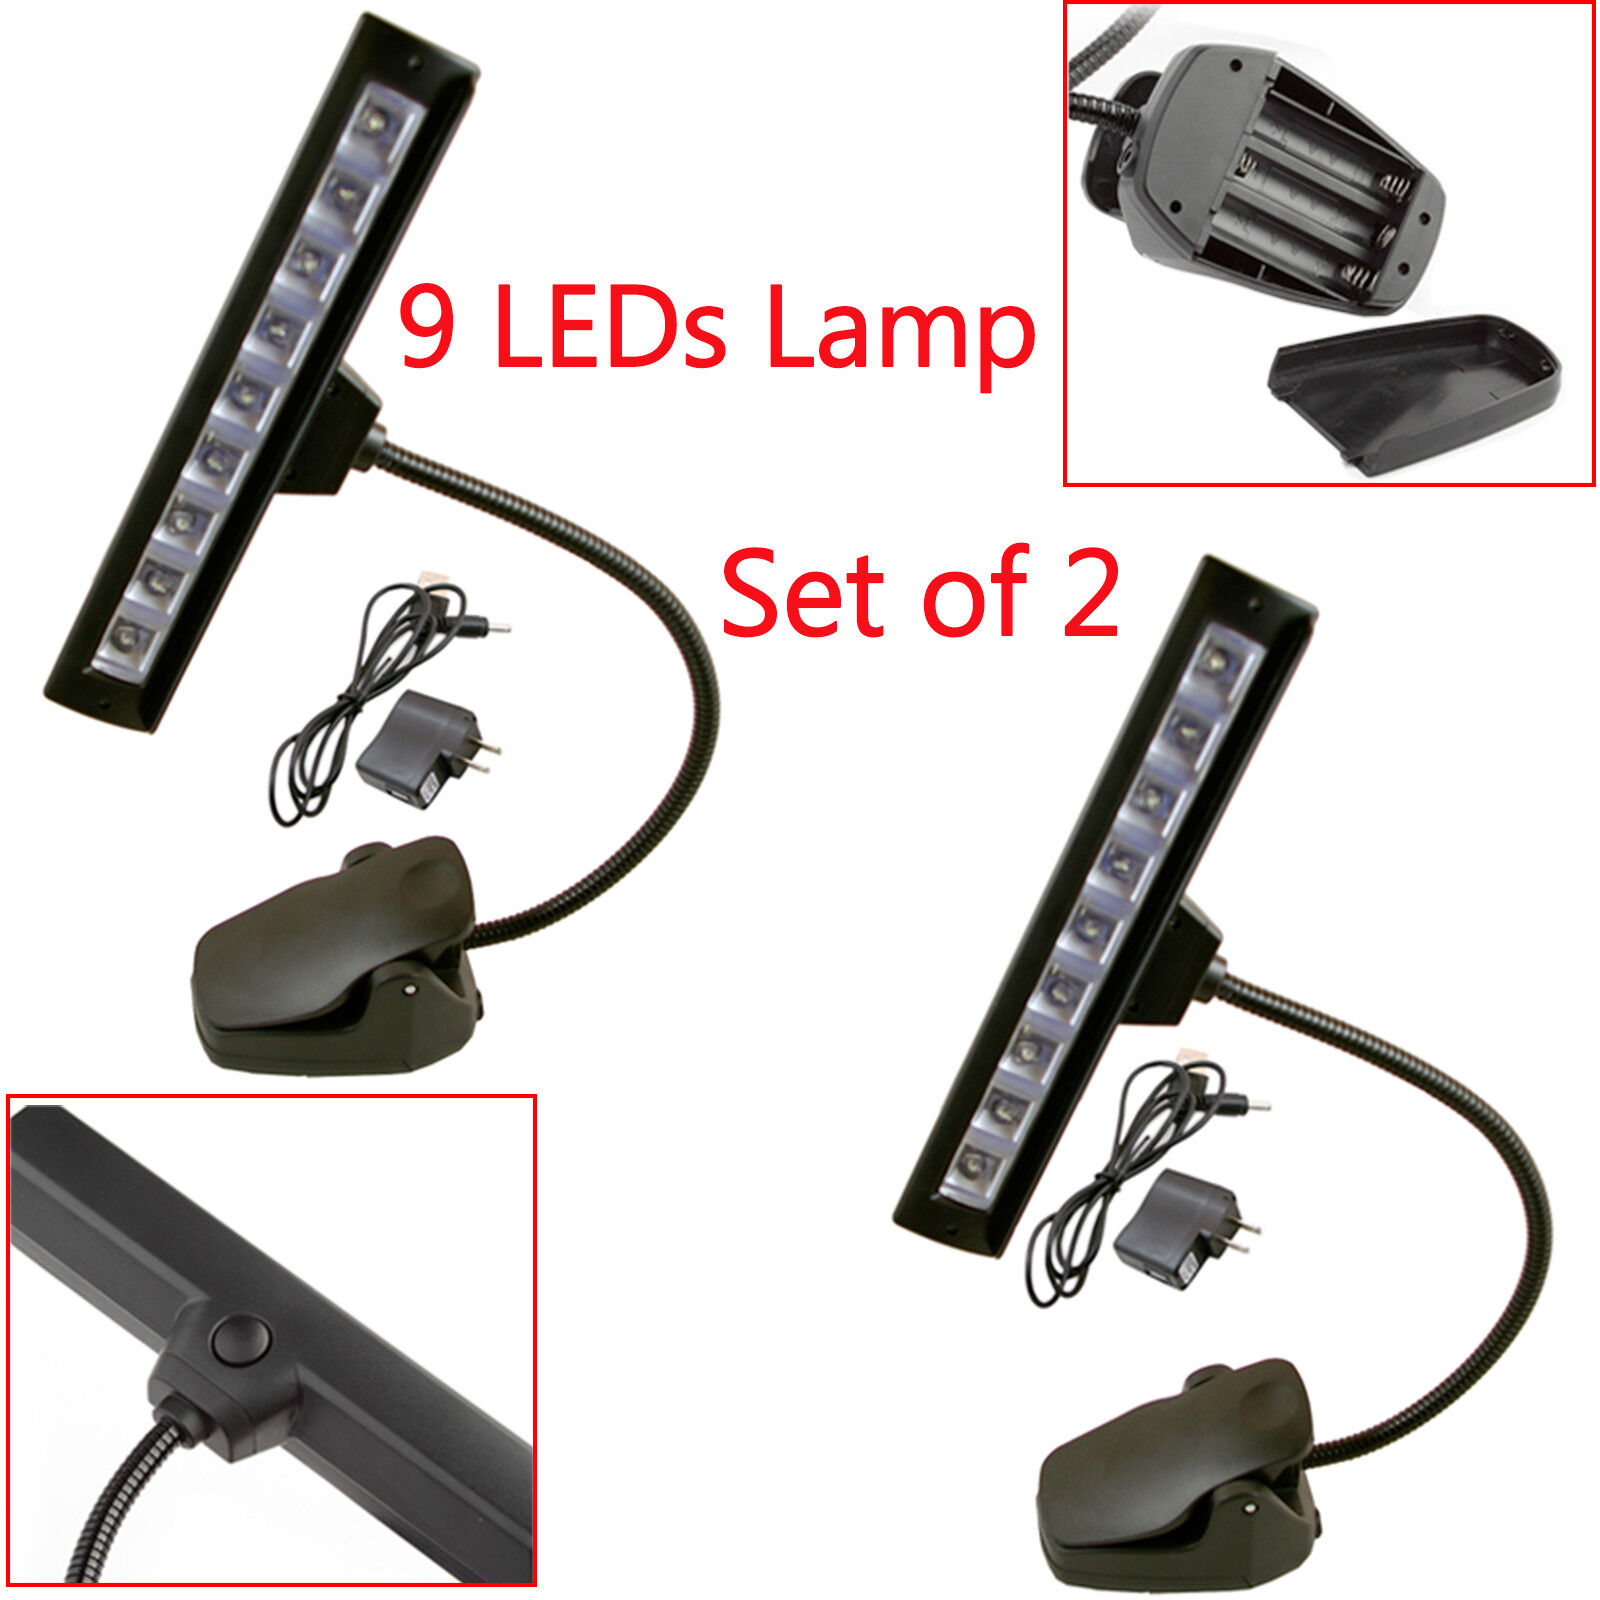 2Pcs 9 LEDs Clip-On Orchestra Music Stand Flexible LED Lamp Light With Adapter Unbranded/Generic Does not apply